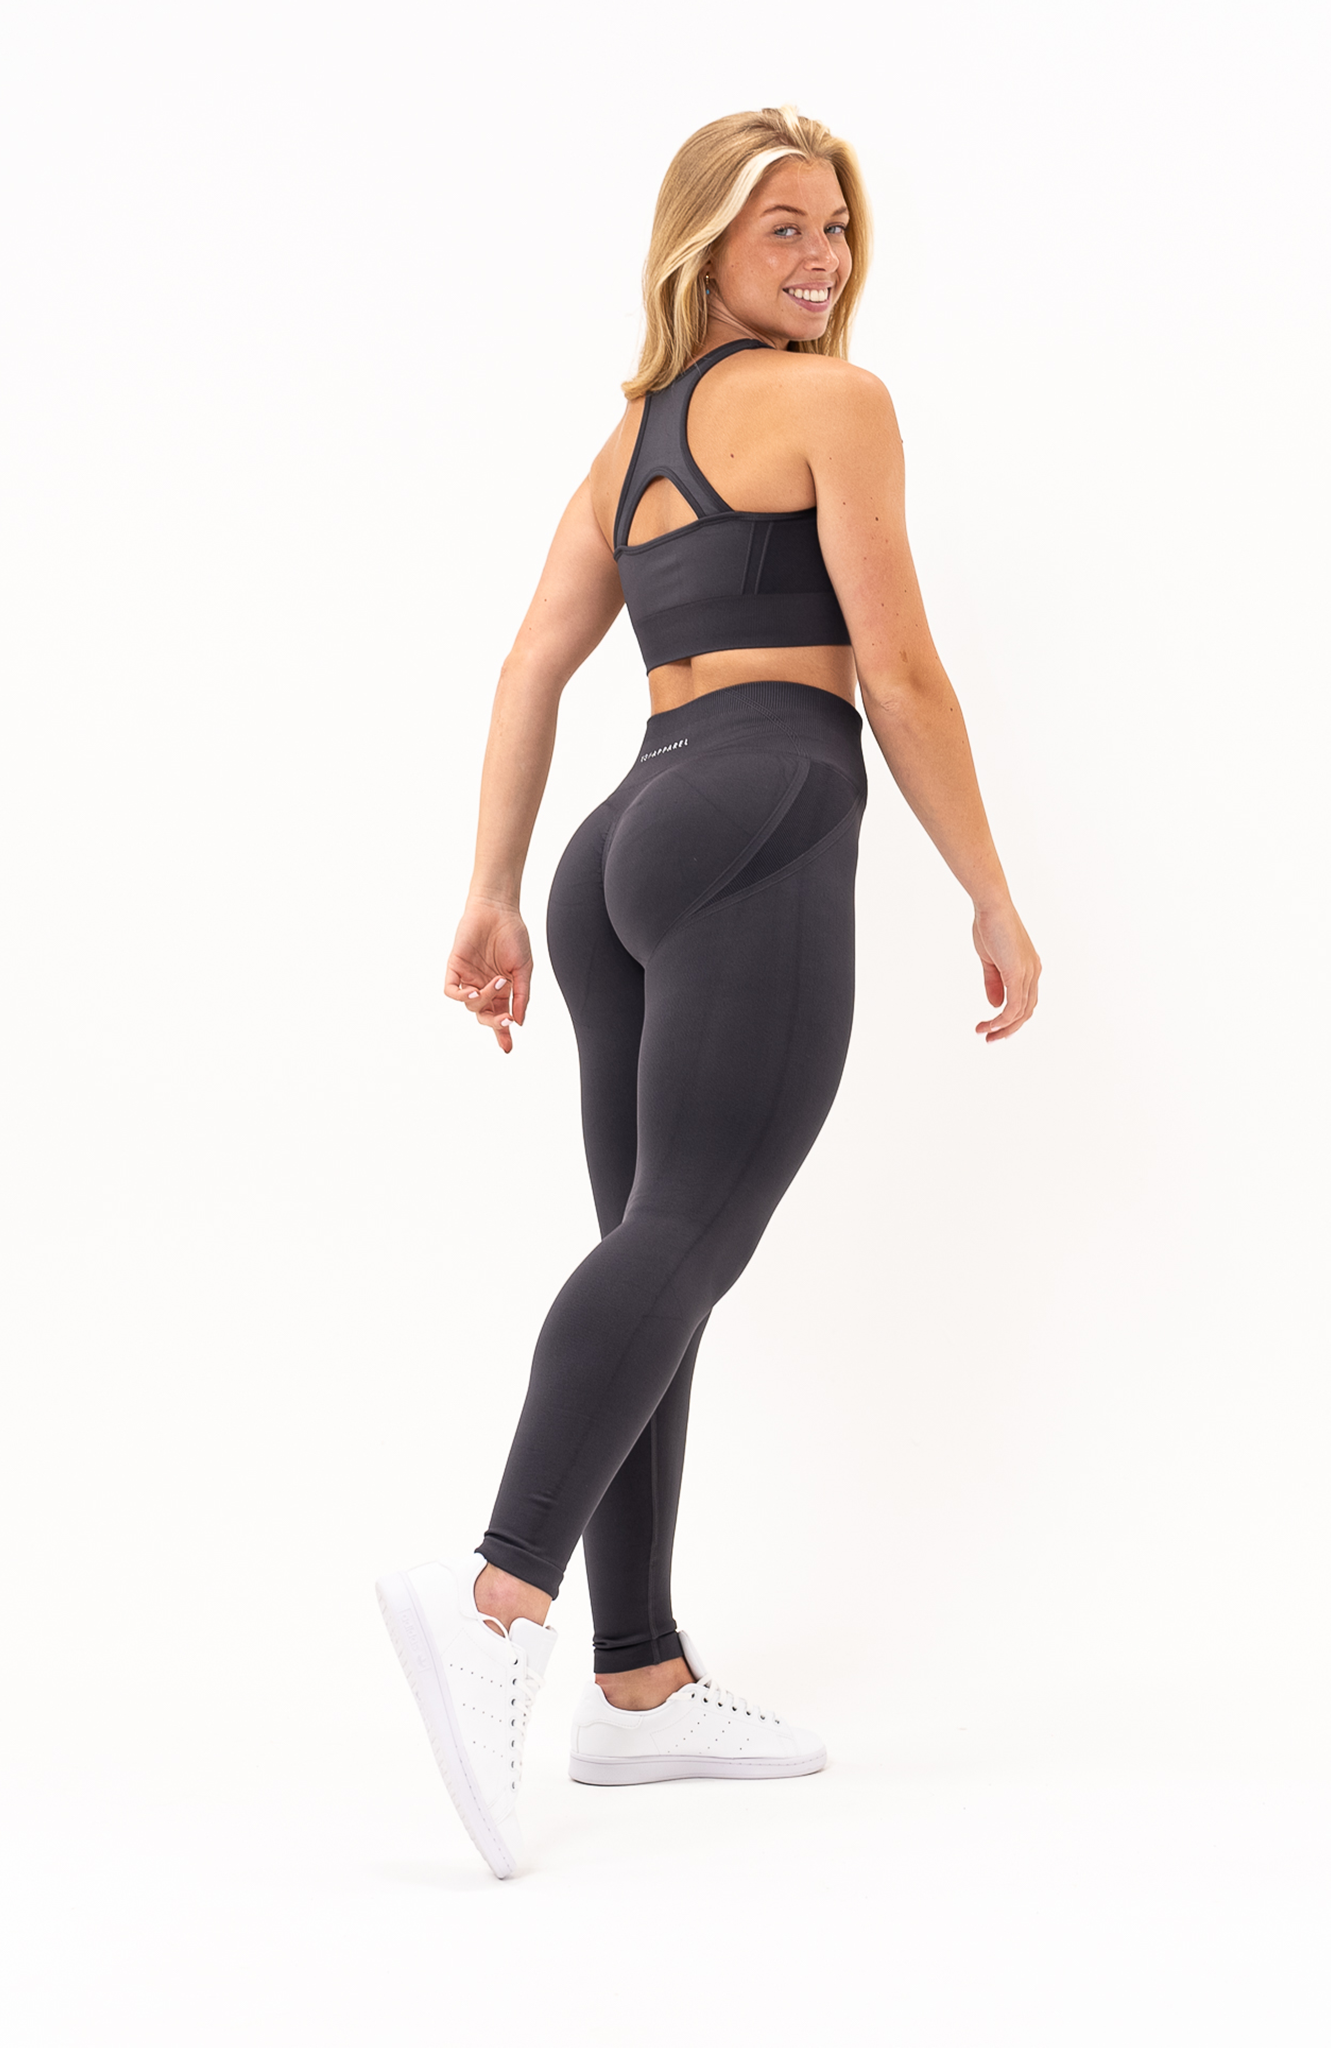 Seamless gym leggings. 10% OFF Your first order when you register